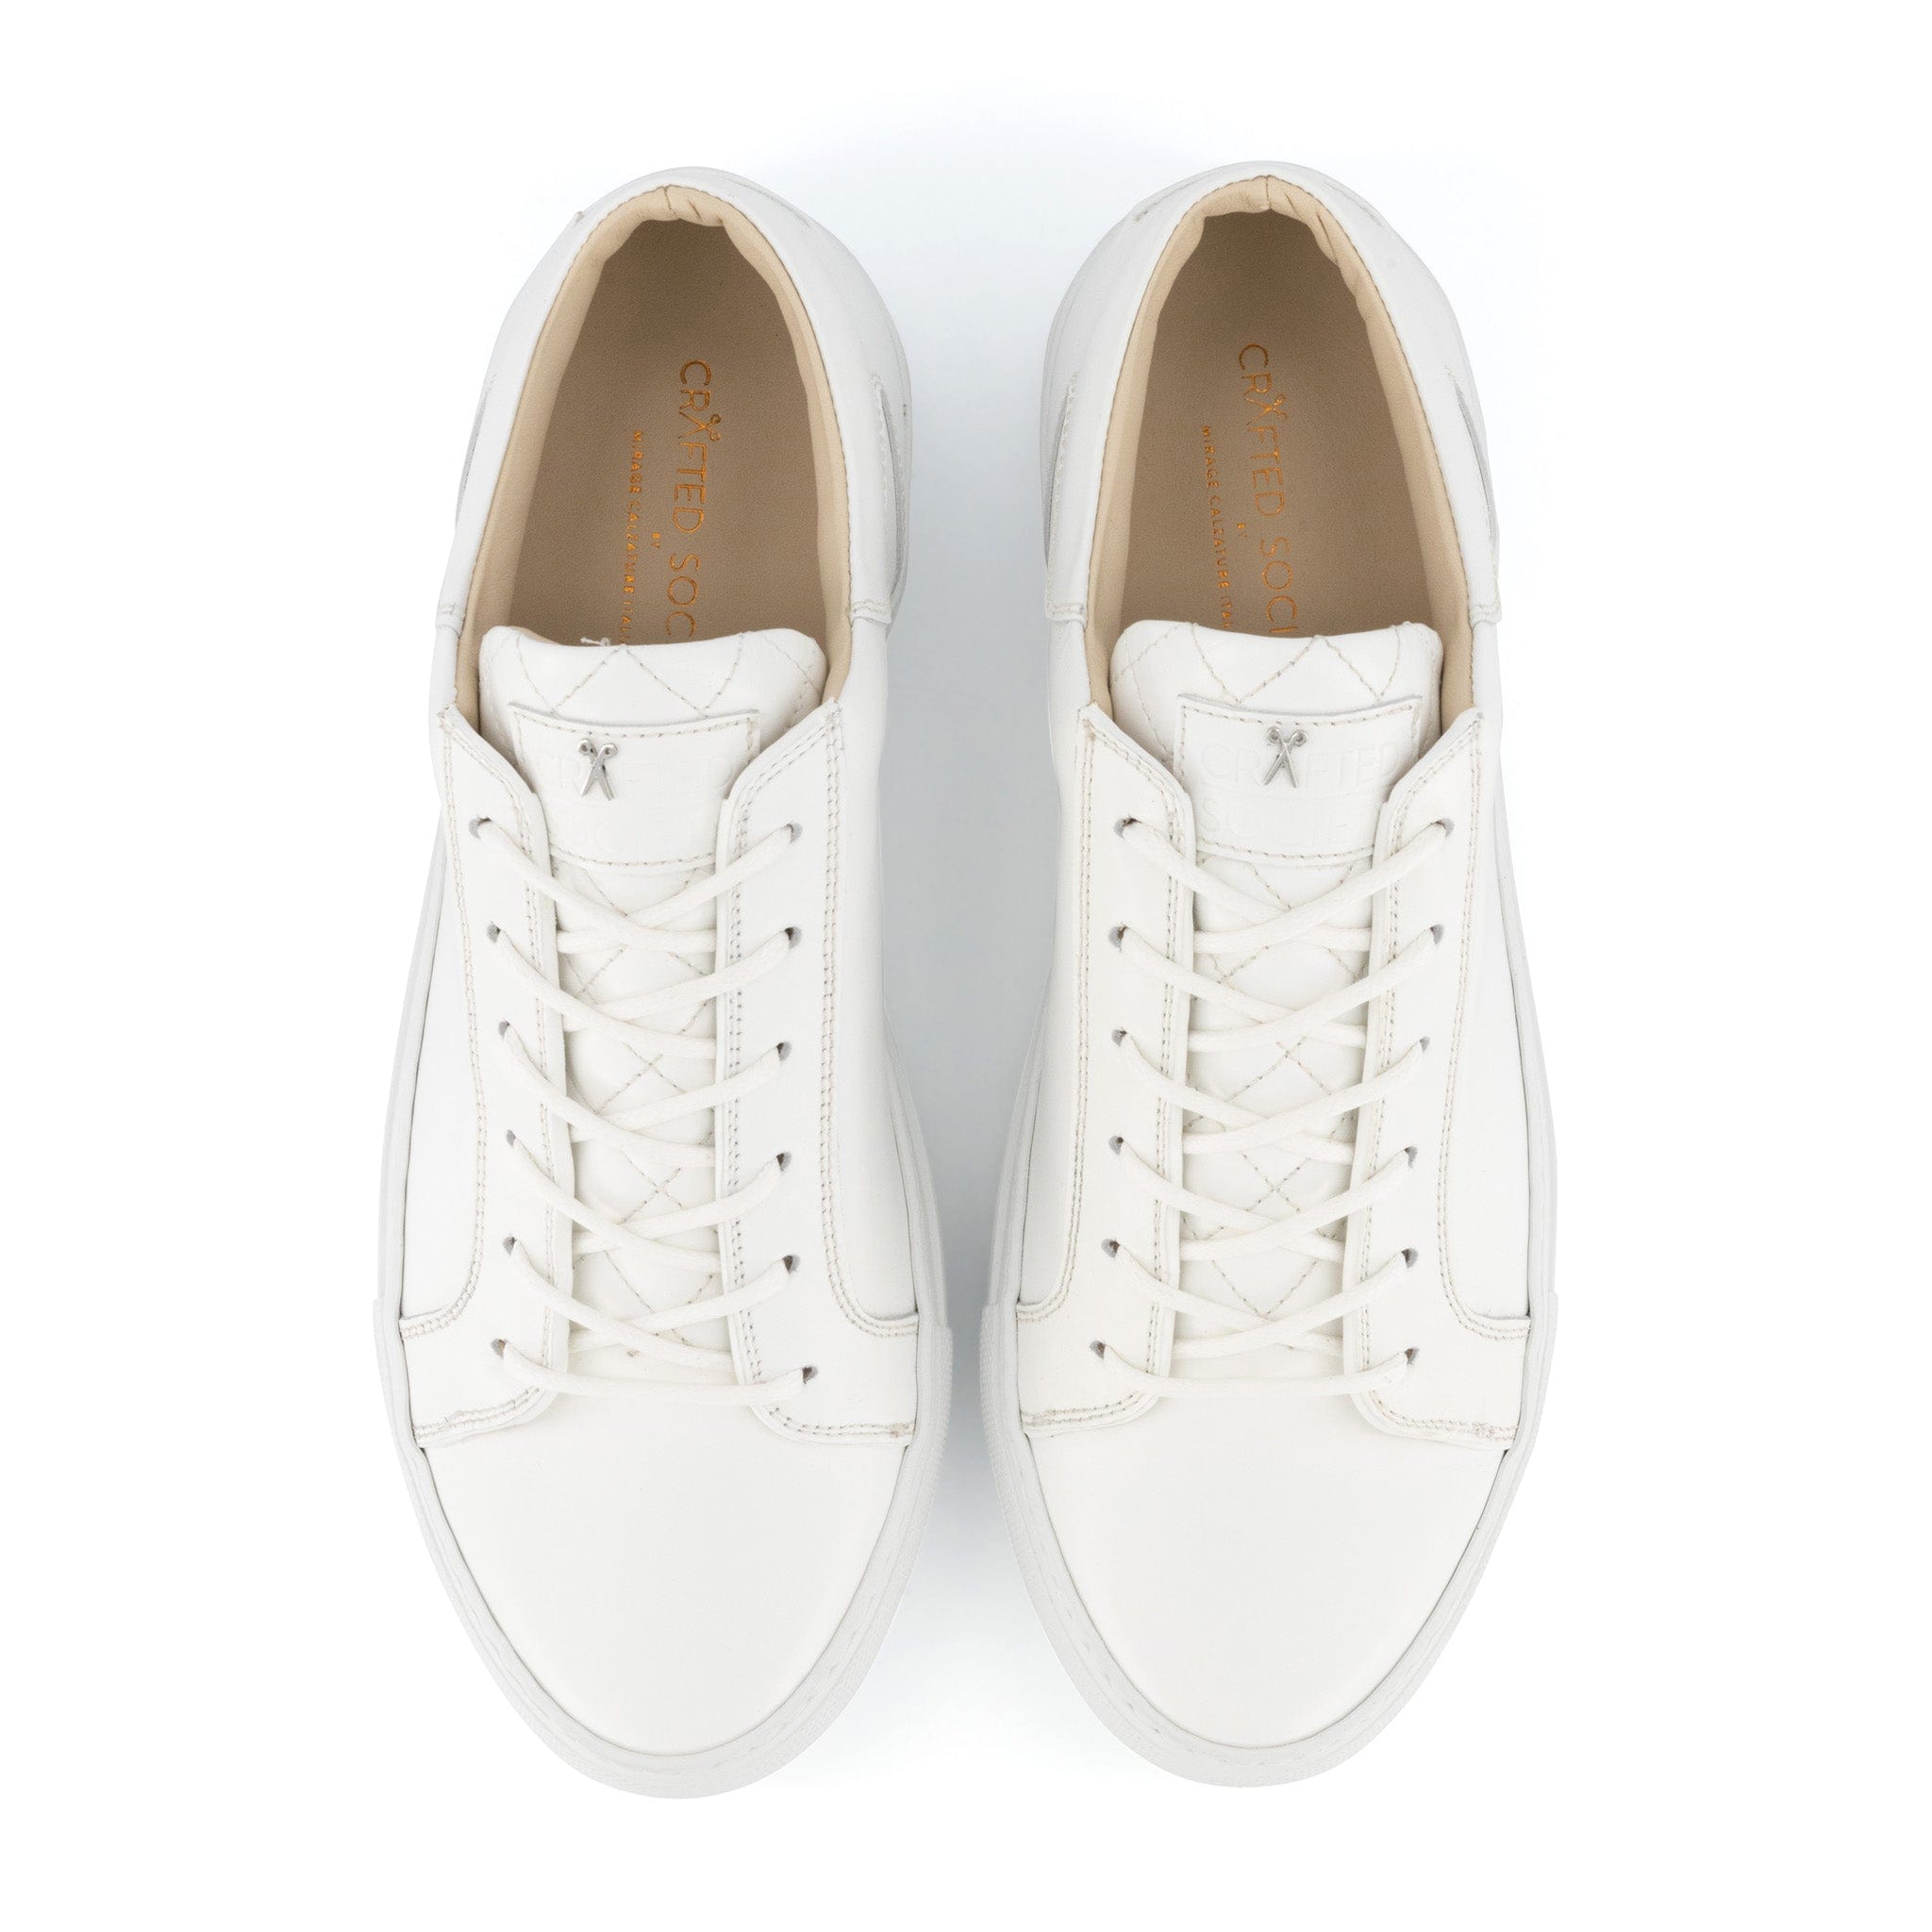 Mario Low Refined Sneaker | White Full Grain Leather | White Outsole | Made in Italy